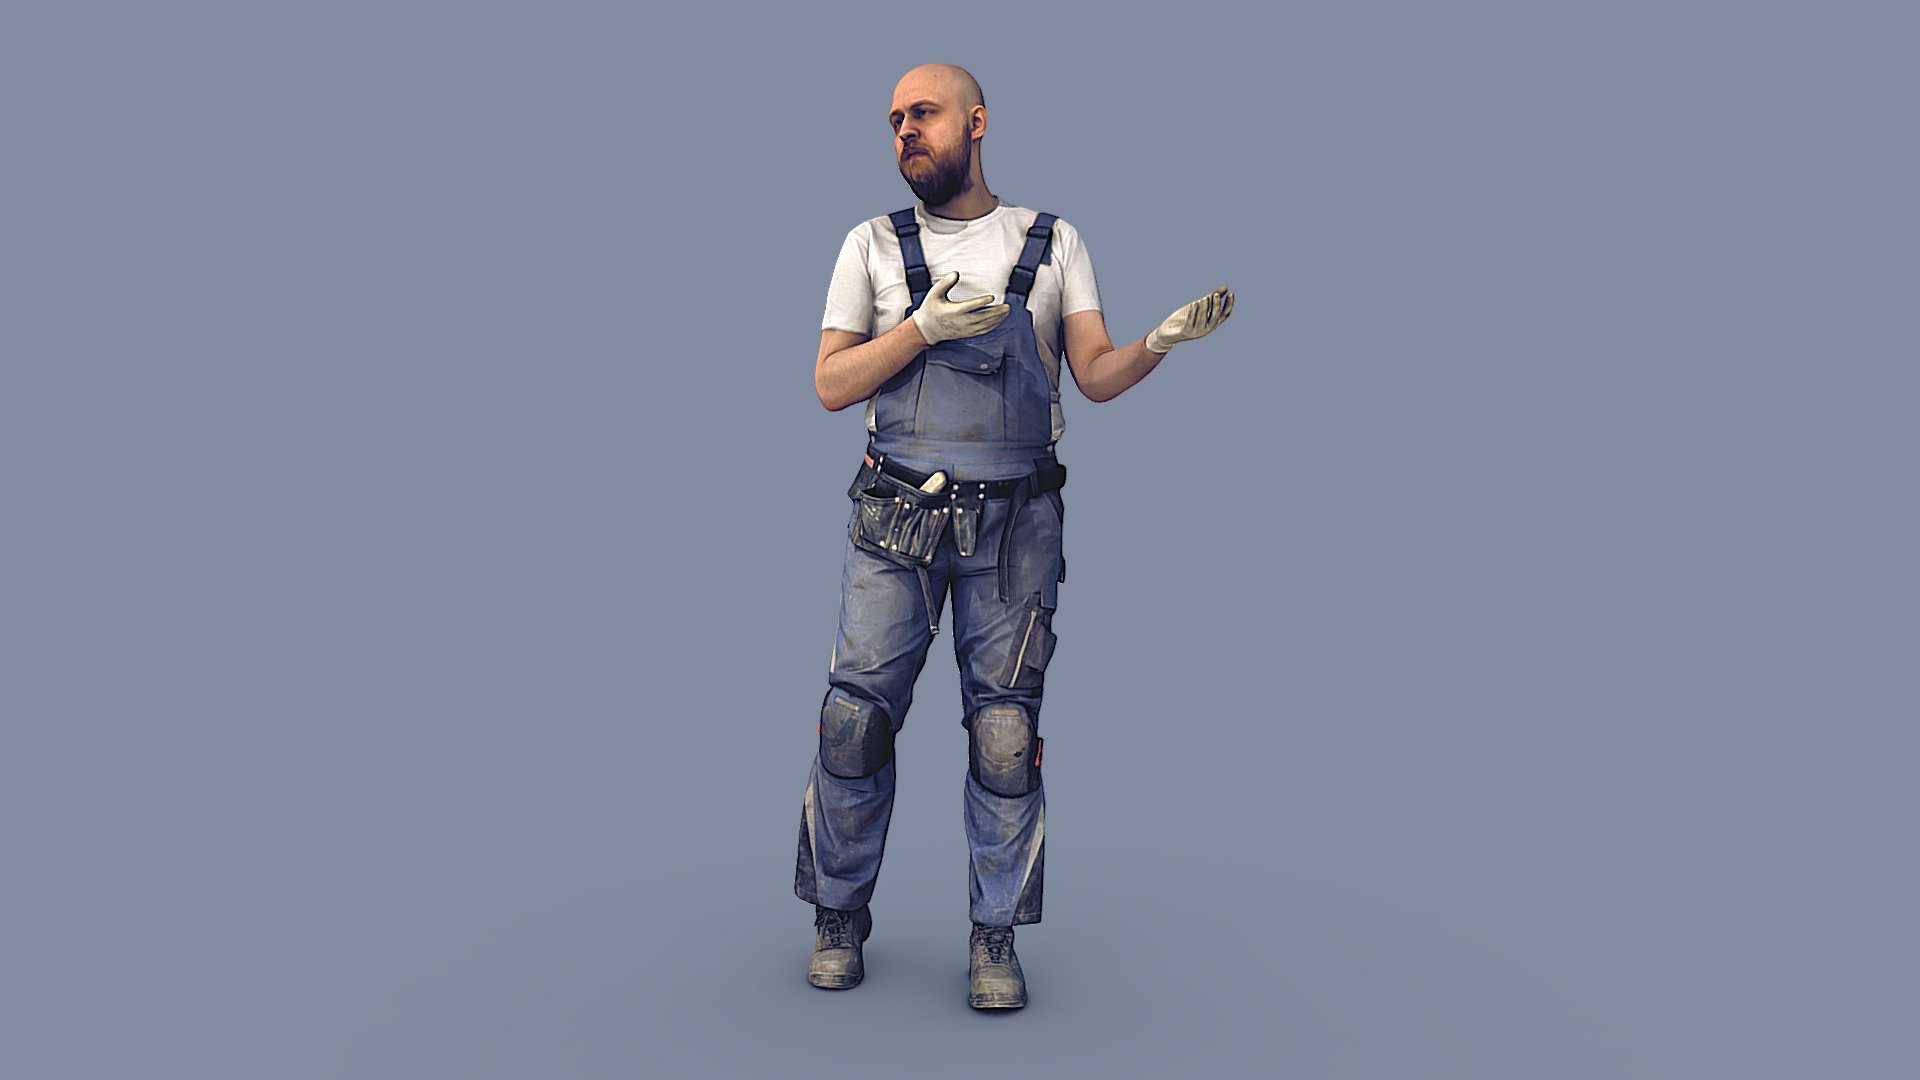 ✉️ A young man, a bald guy with a beard, a builder, a worker, in a construction uniform, in overalls, in gloves, with a tool belt bag, in knee protection, stands, gestures with his hands, talks emotionally, explains.

🦾 This model will be an excellent mid-range participant. It does not need to be very close and try to see the details, it reveals and demonstrates its texture as much as possible in case of a certain distance from the foreground.

⚙️ Photorealistic Construction Worker Character 3d model ready for Virtual Reality (VR), Augmented Reality (AR), games and other real-time apps. Suitable for the architectural visualization and another graphical projects. 50 000 polygons per model 3d model